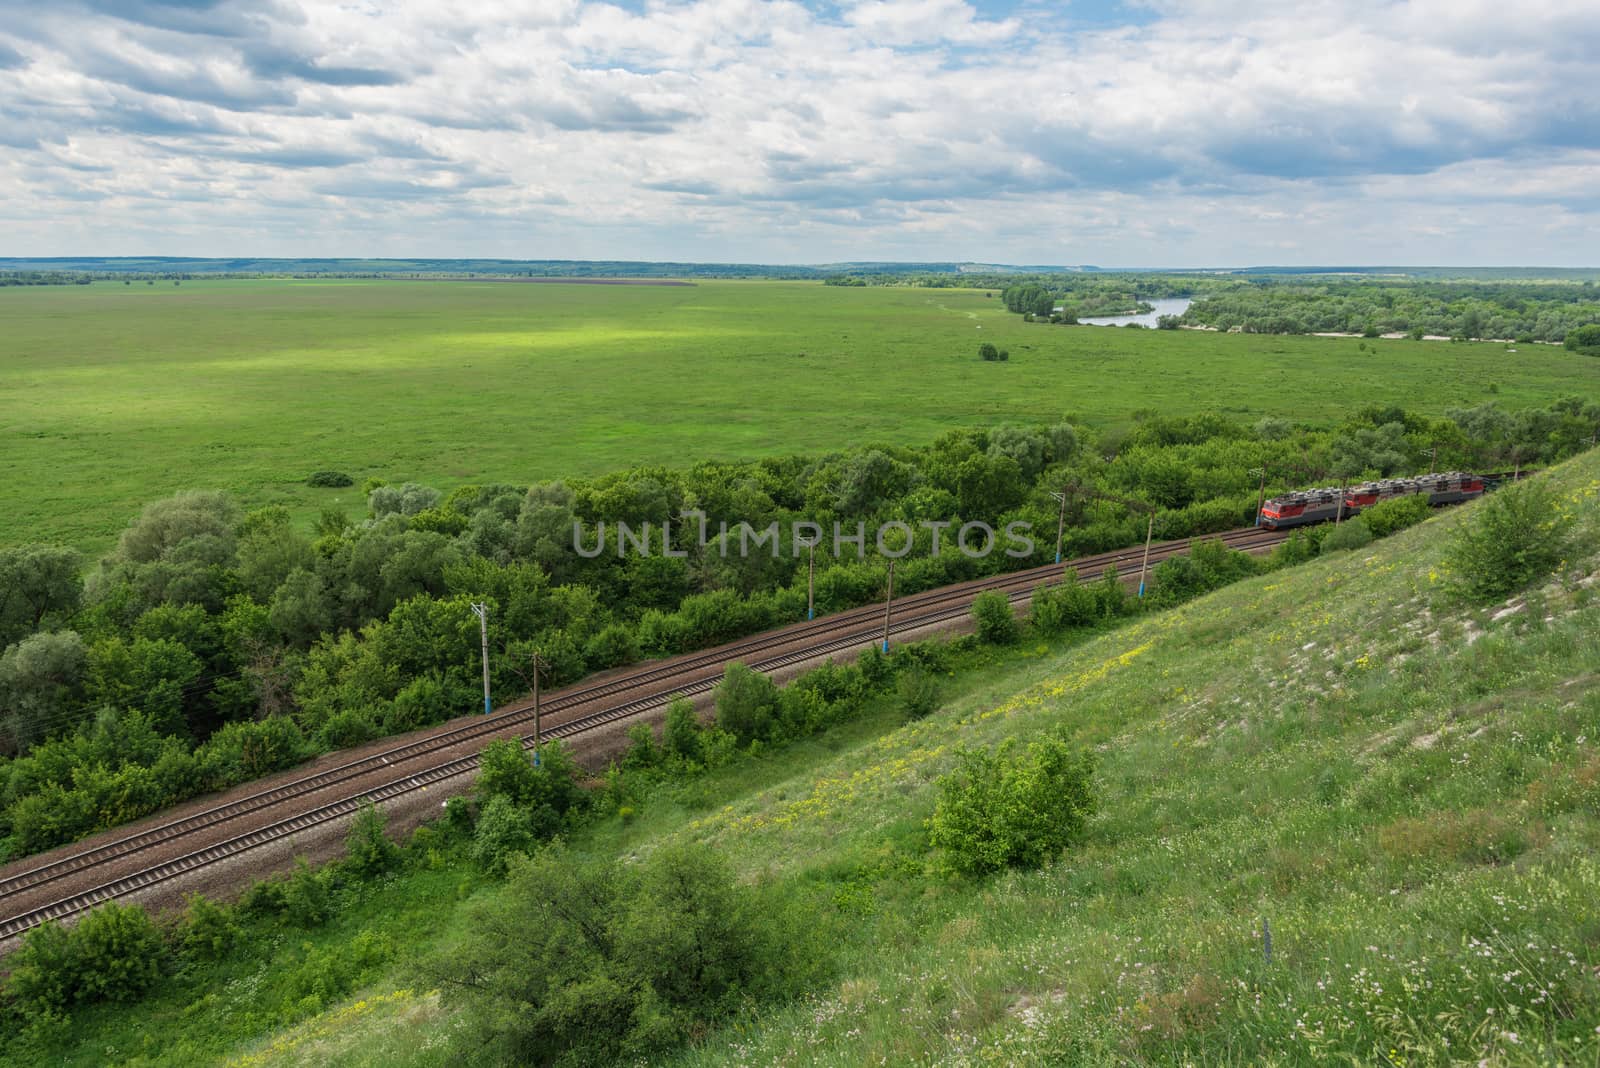 Freight train with locomotives passing by rail in Russia, along the typical Russian landscape, top view by claire_lucia